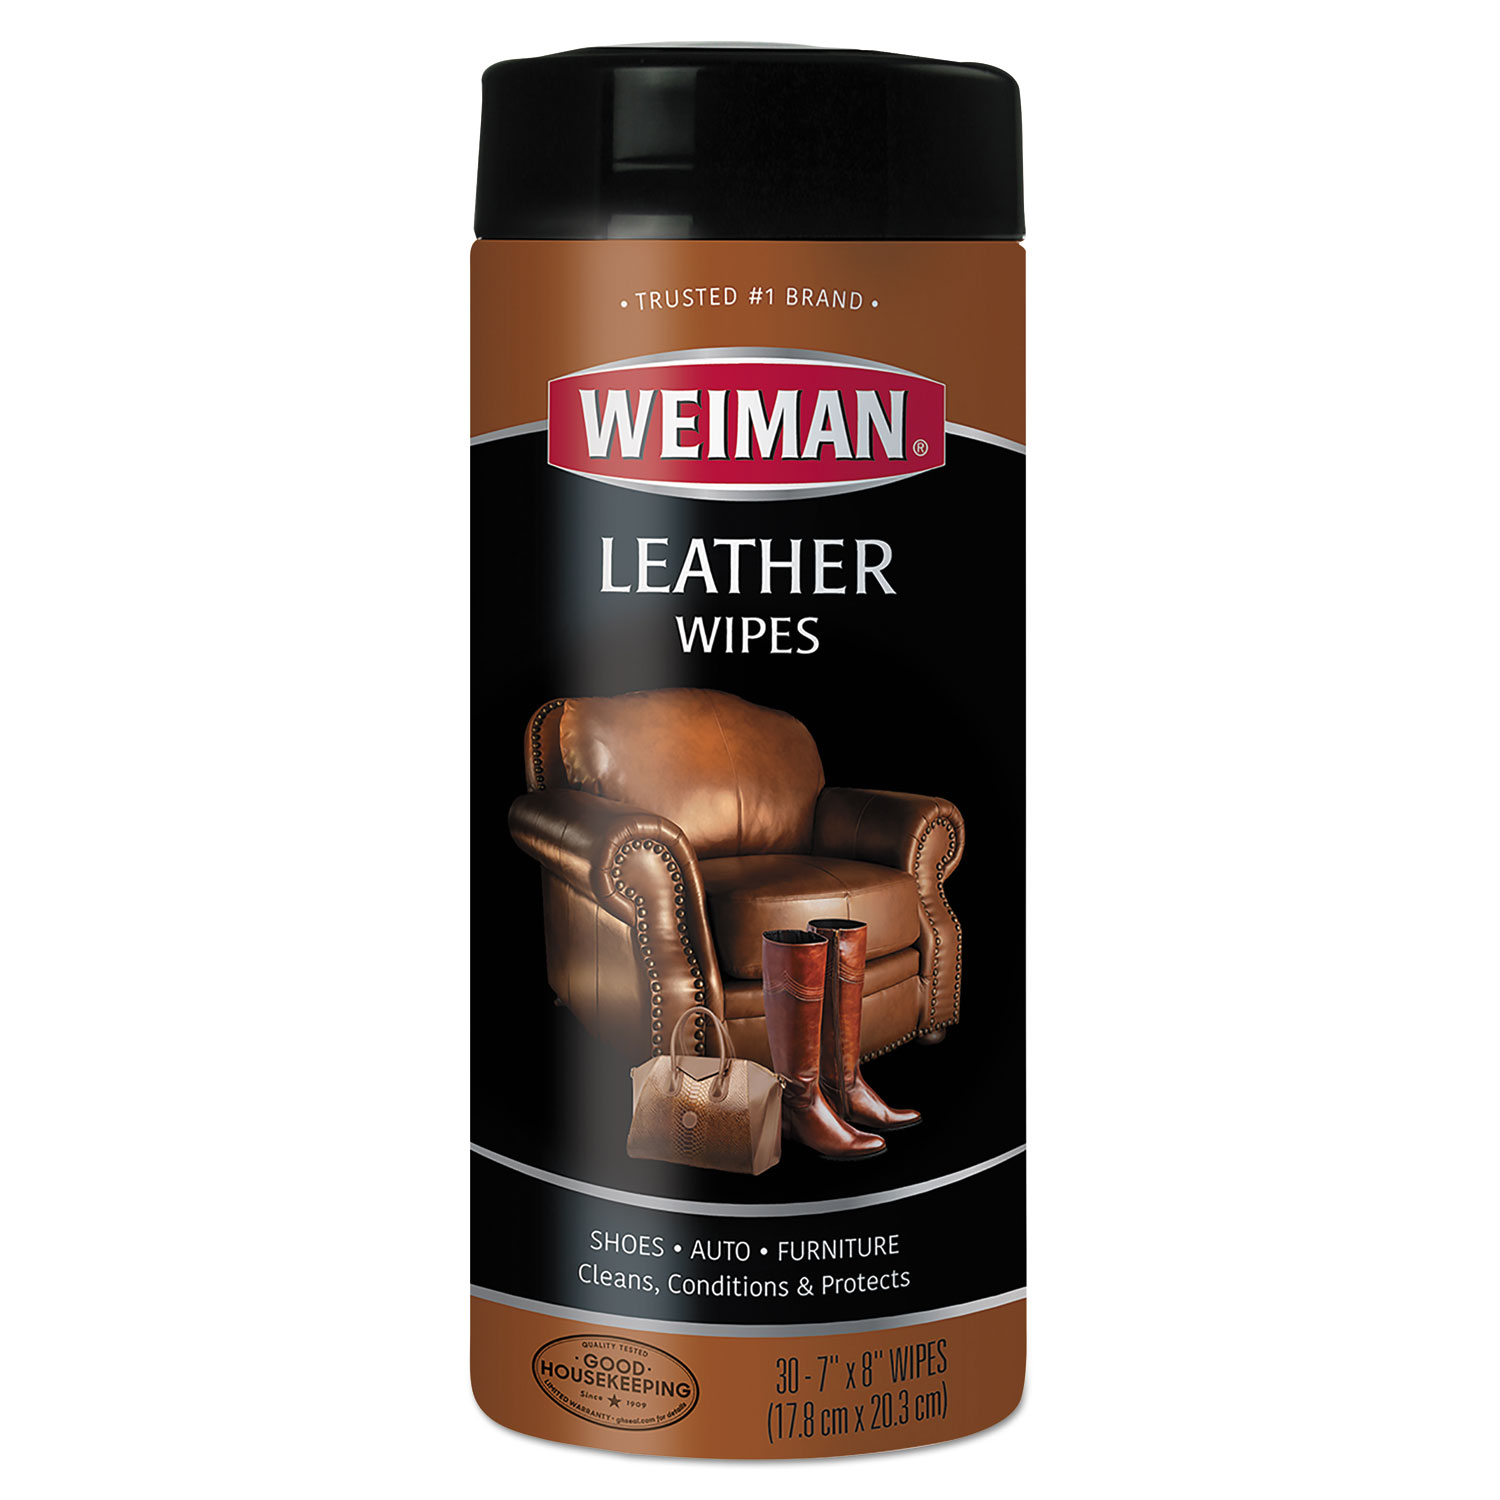  WEIMAN 91CT Leather Wipes, 7 x 8, 30/Canister, 4 Canisters/Carton (WMN91CT) 